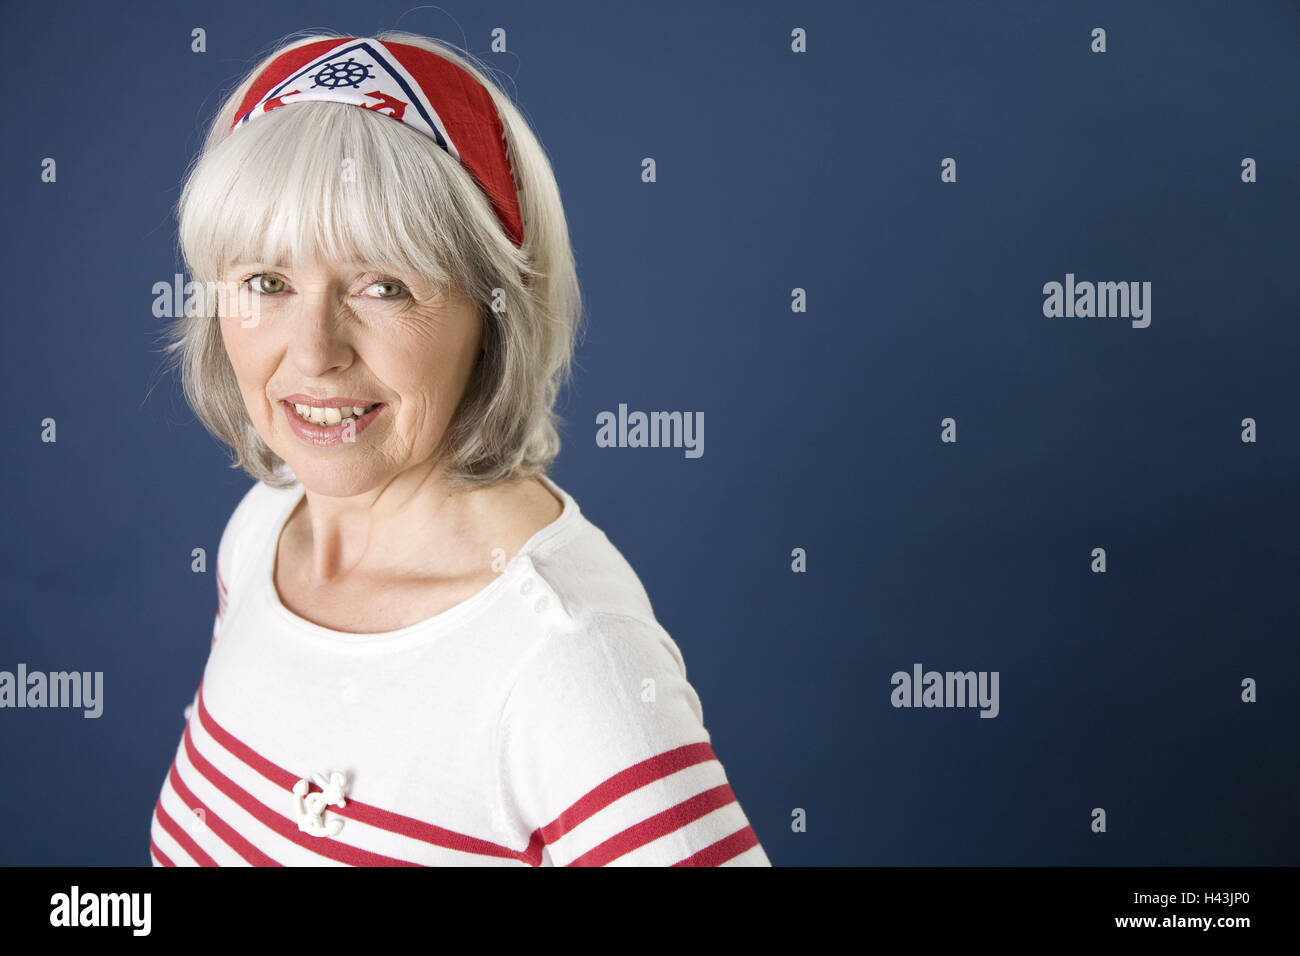 Senior, course, youthfully, hair-band, pullovers, red-white, portrait, Best-Age, woman, senior citizens, 60 +, grey-haired, T-shirt, touched, folds, smile, doubtful, transmission, naturalness, studio, Stock Photo